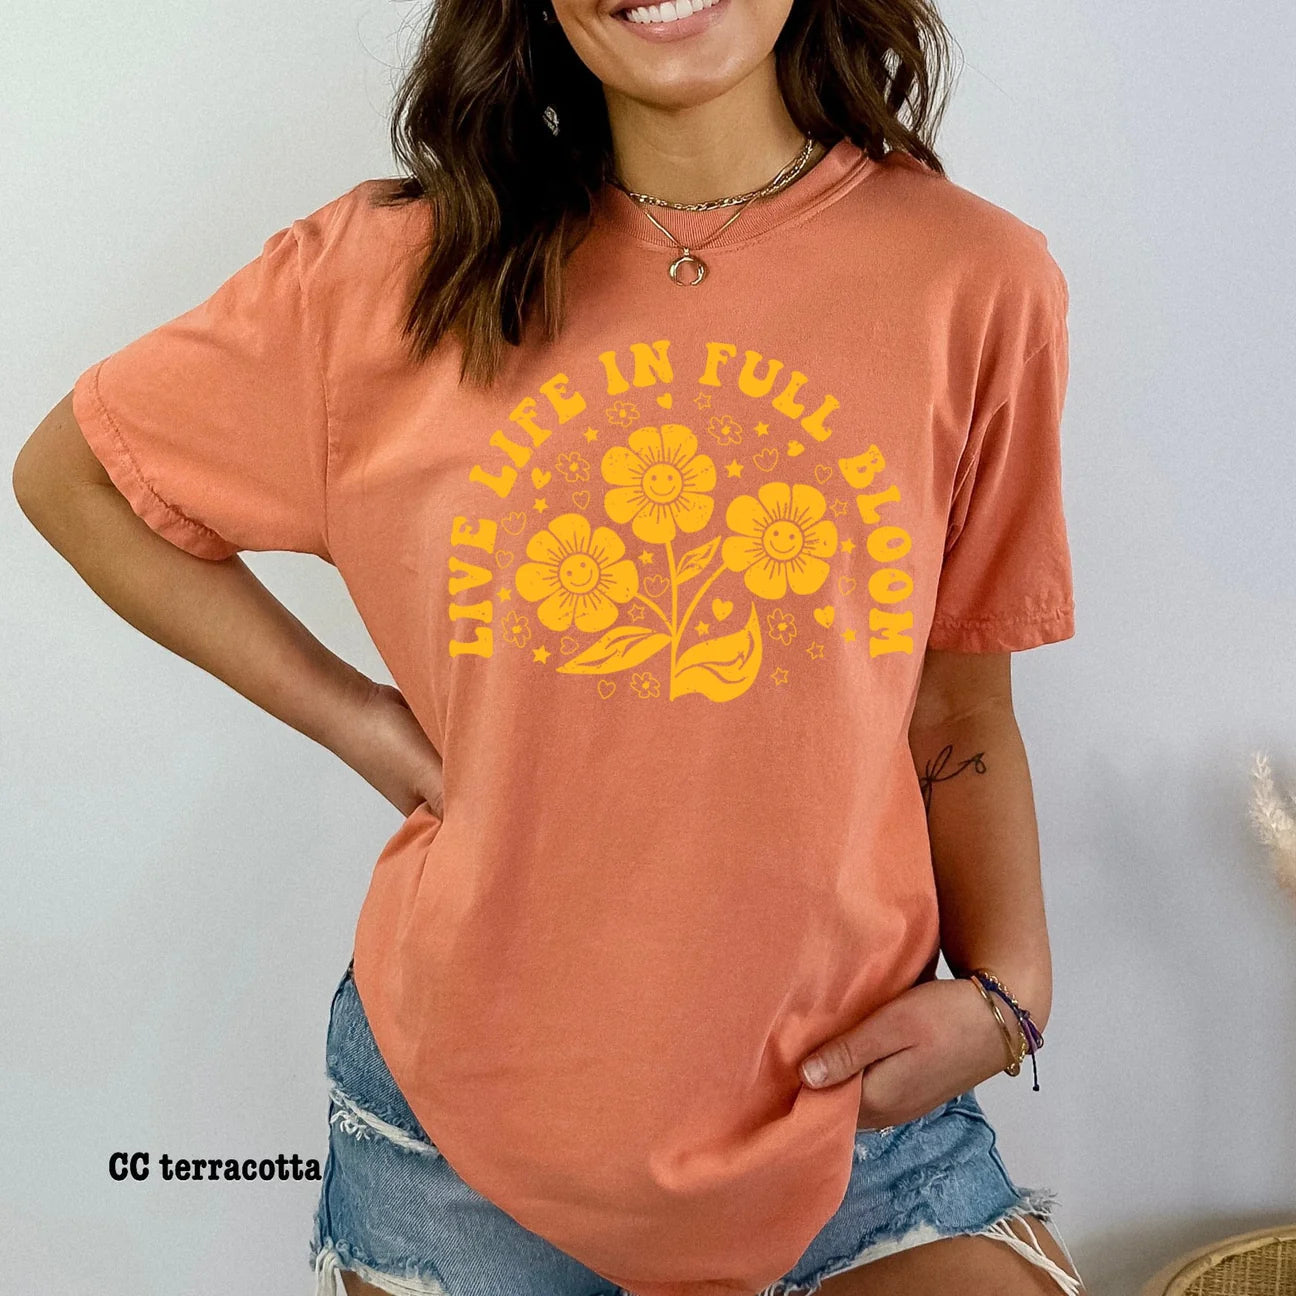 "Live Life in Full Bloom" T-shirt (shown on Comfort Colors "Terracotta")